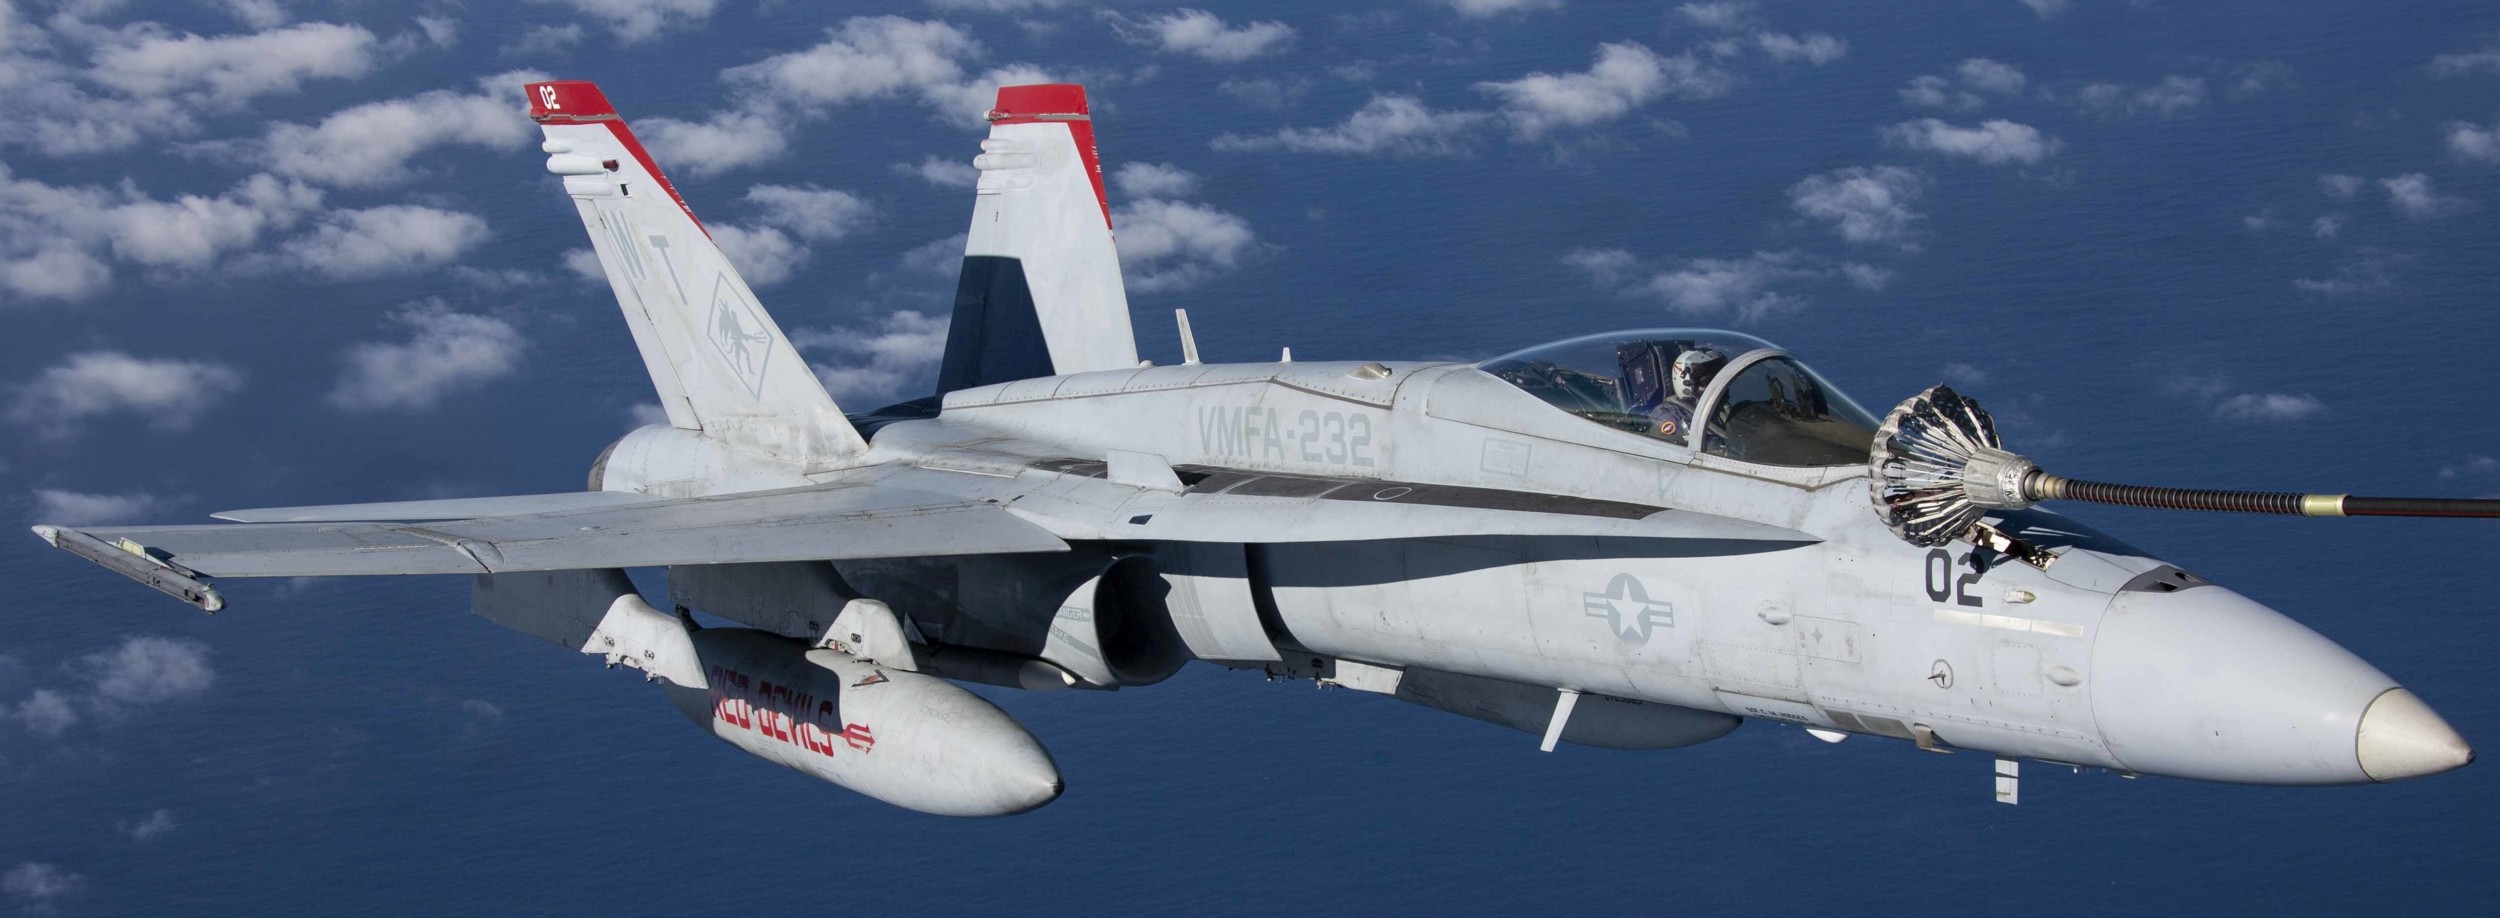 vmfa-232 red devils marine fighter attack squadron usmc f/a-18c hornet 228 exercise winter fury